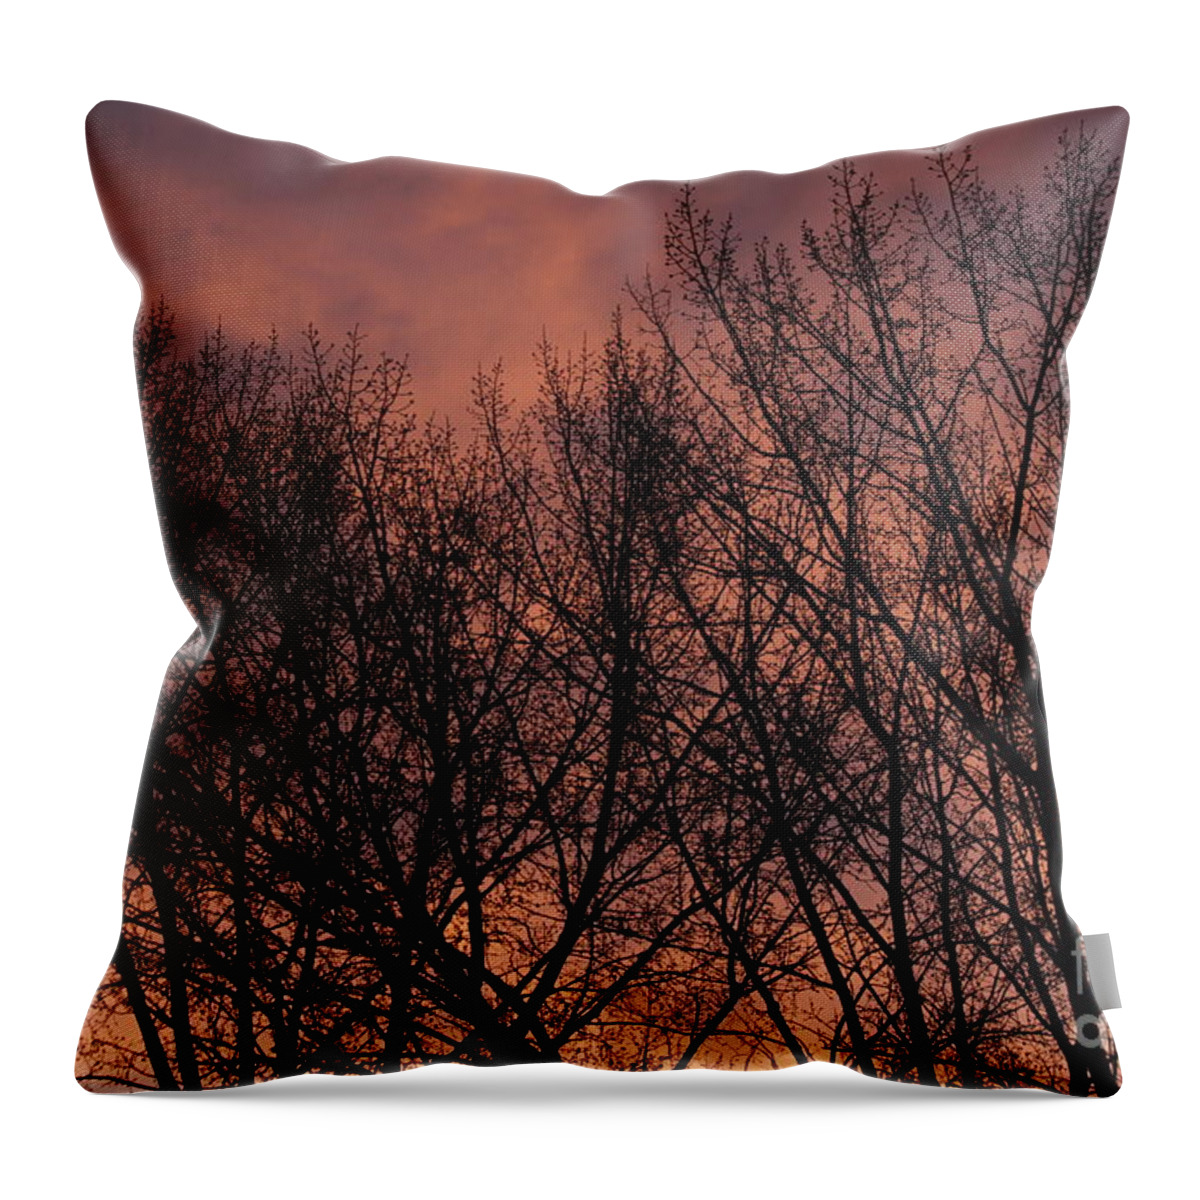 Sunrise Throw Pillow featuring the photograph Morning Starts by Ann E Robson